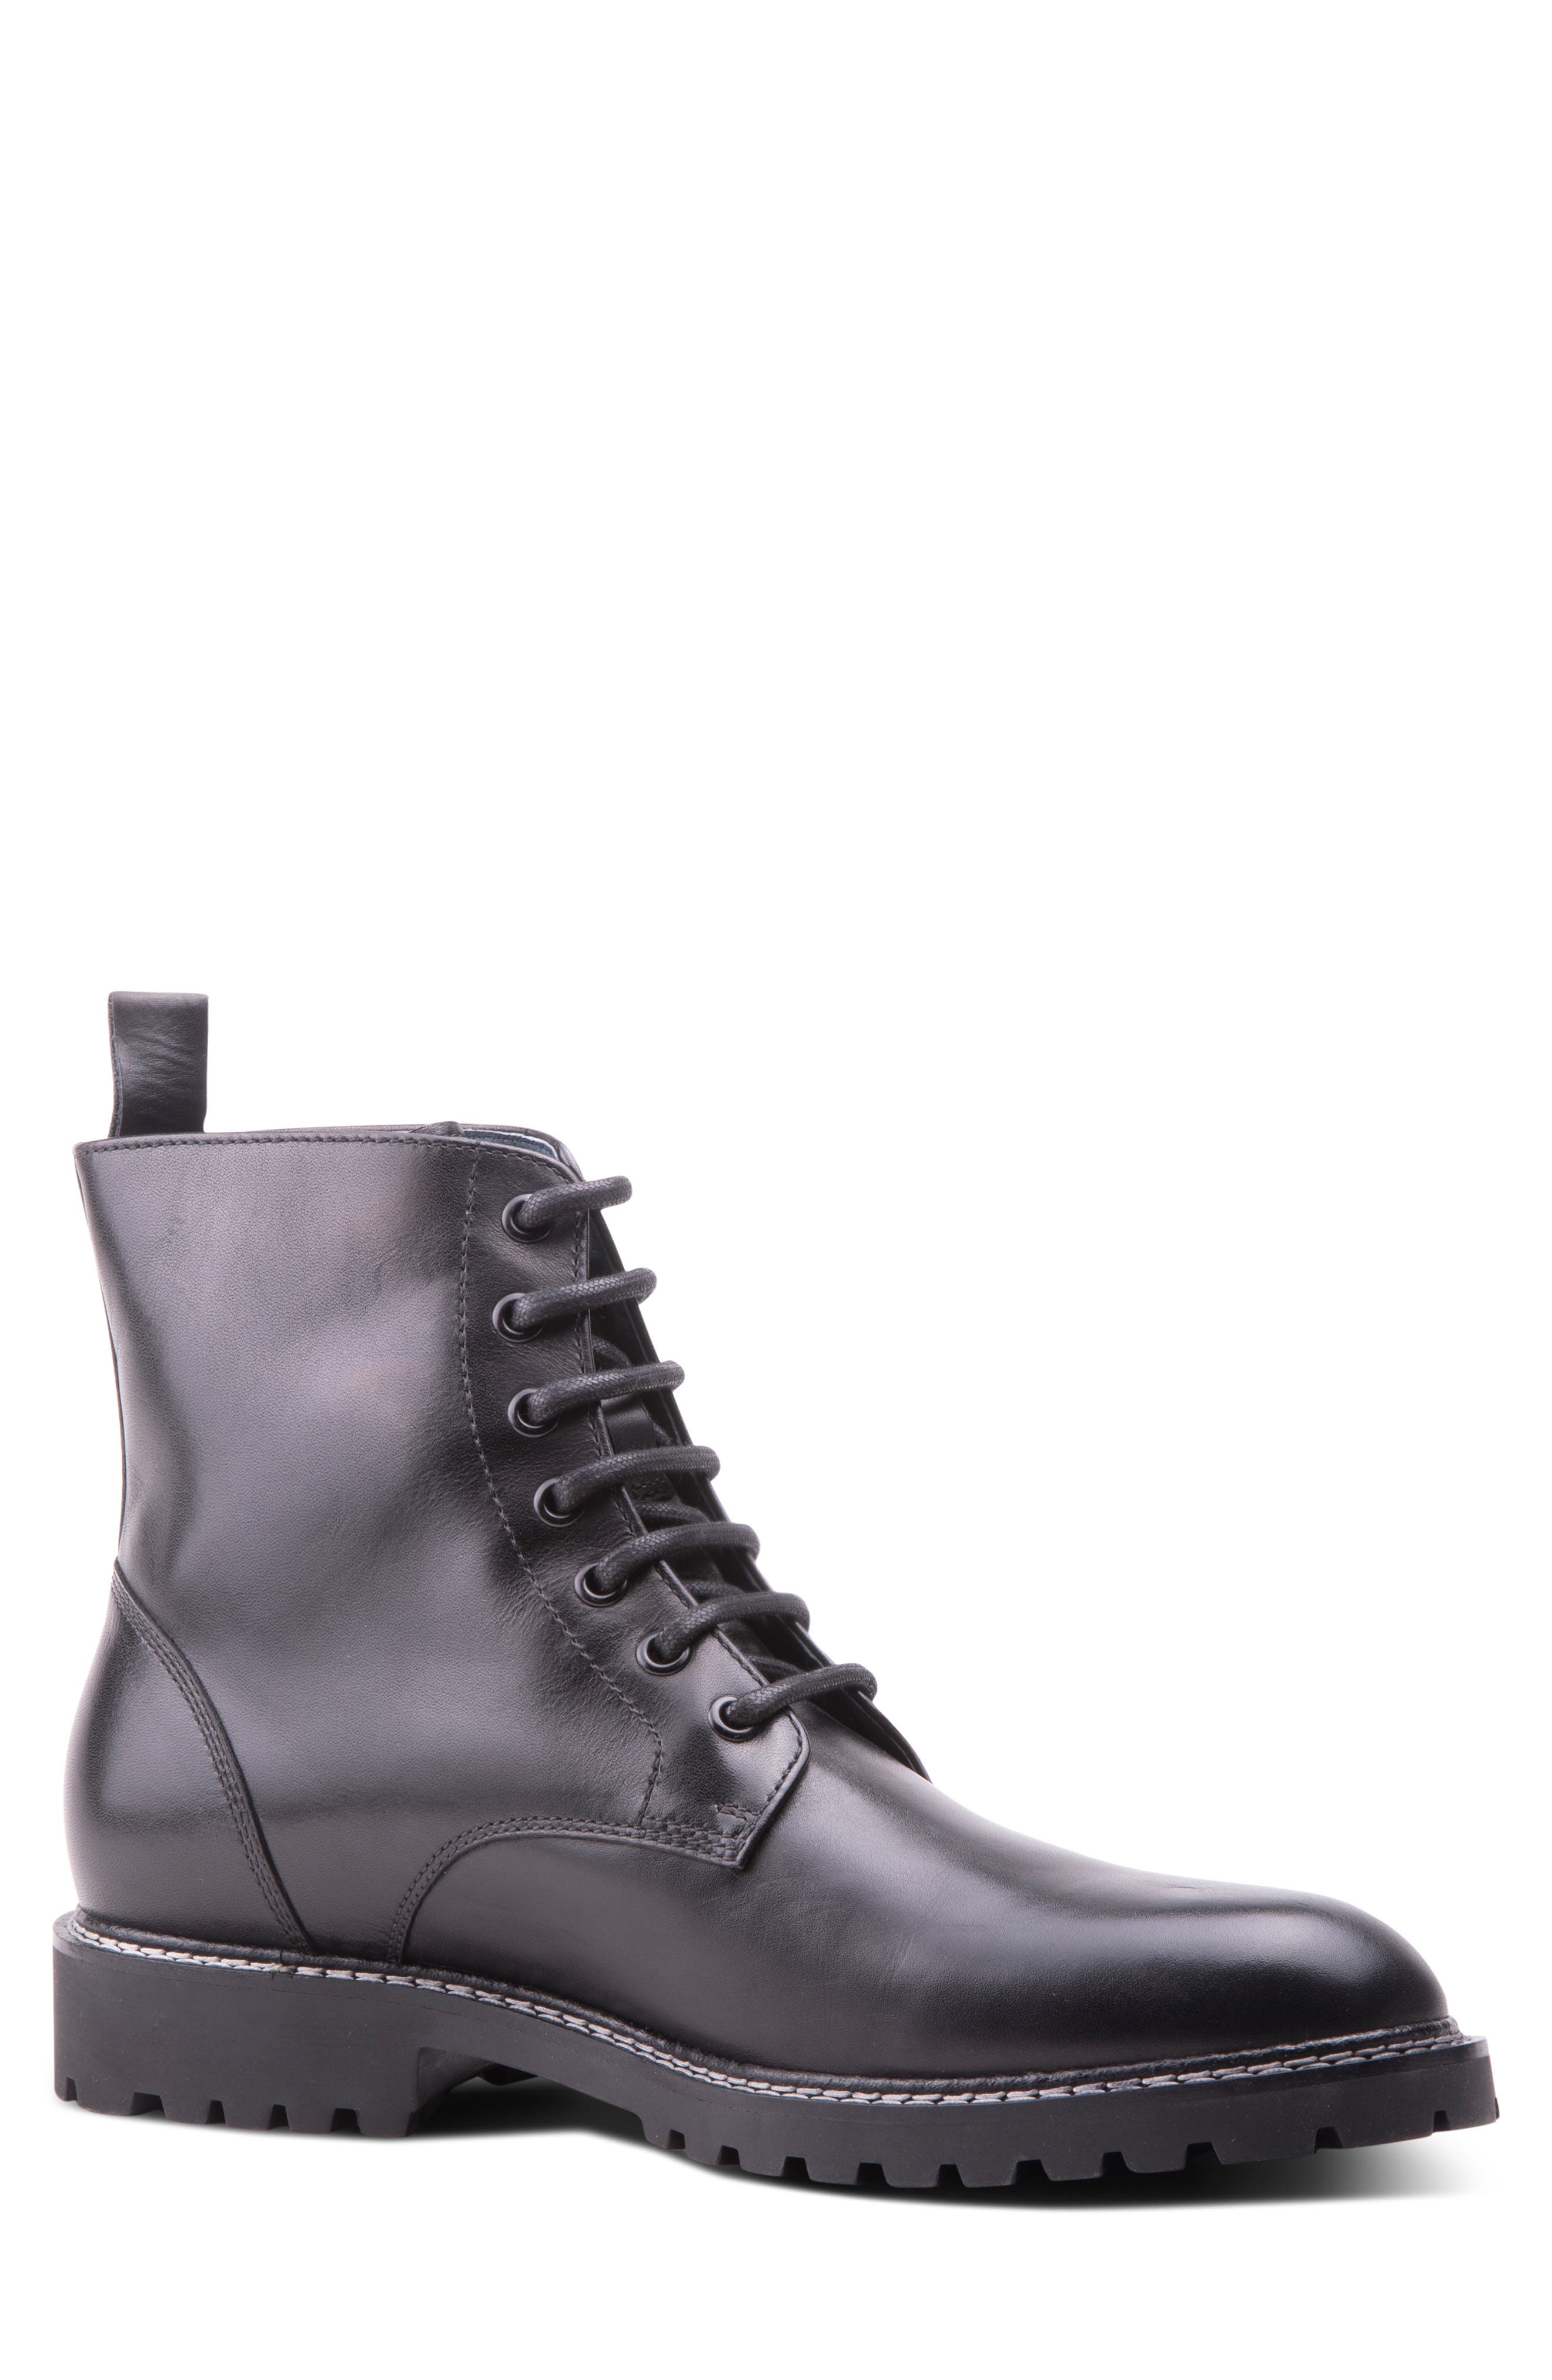 Blake Mckay Townsend Leather Boot in Black